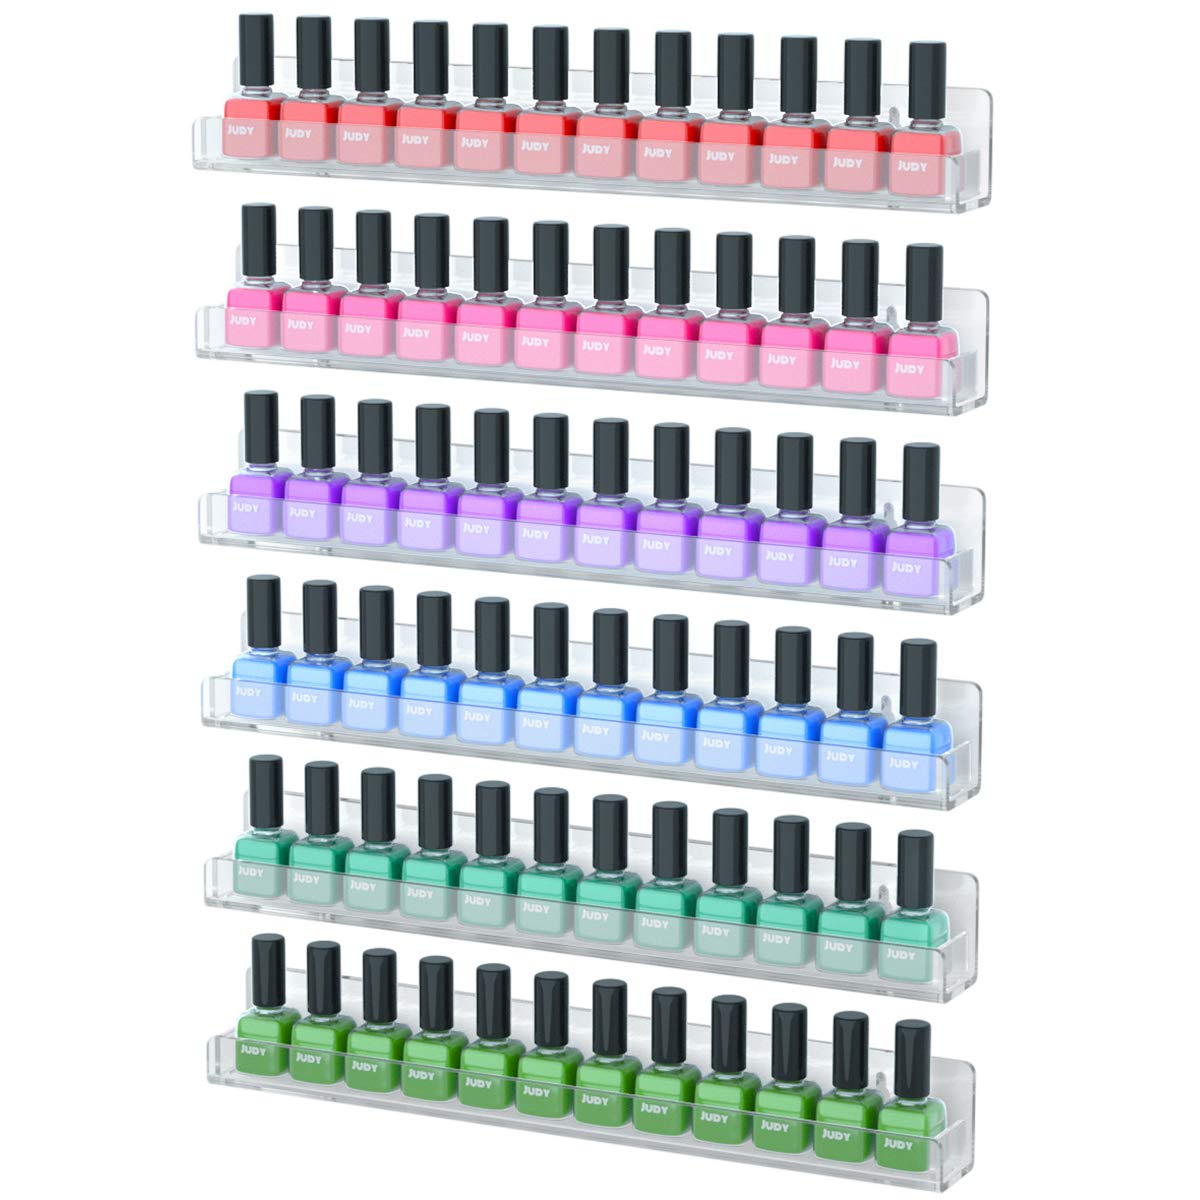 LikeU Nail Polish Rack Wall Mounted Shelf 4 Pack,Clear Acrylic Nail Polish  Holder Organizer with Removable Anti-slip End Inserts,4 Tiers Floating Polish  Organizer Display 60 Bottles : Amazon.in: Beauty